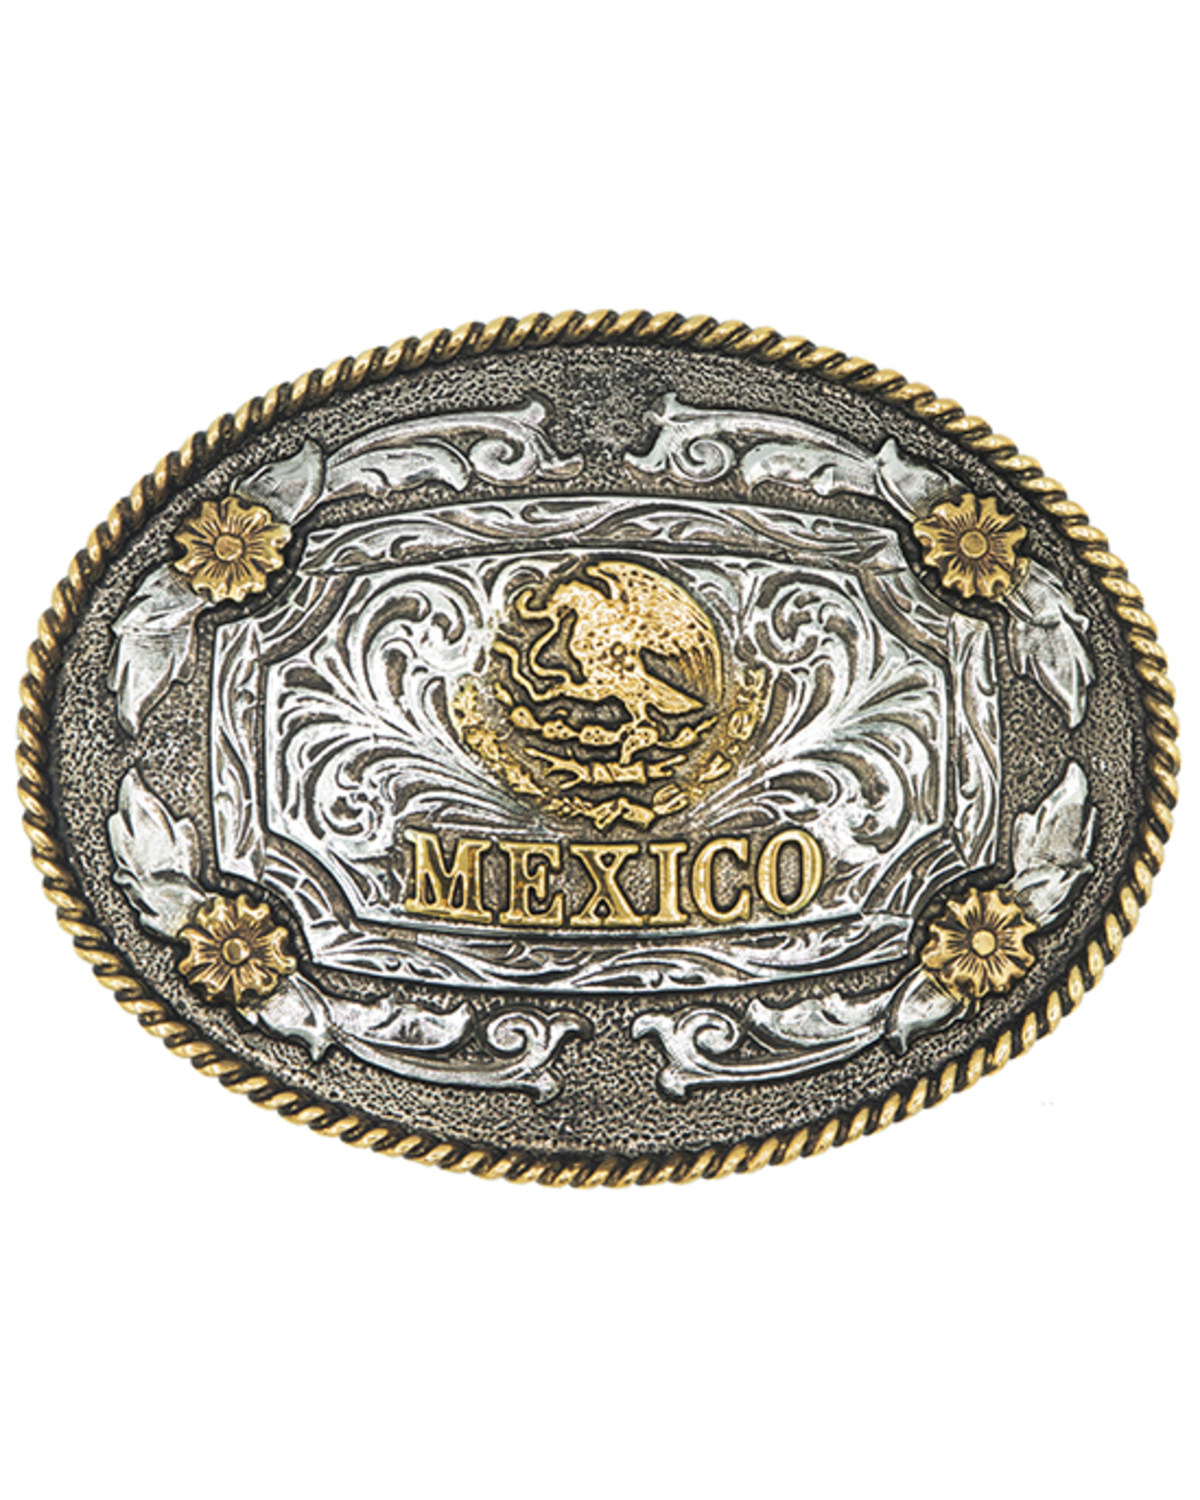 AndWest Mexico Floral Belt Buckle